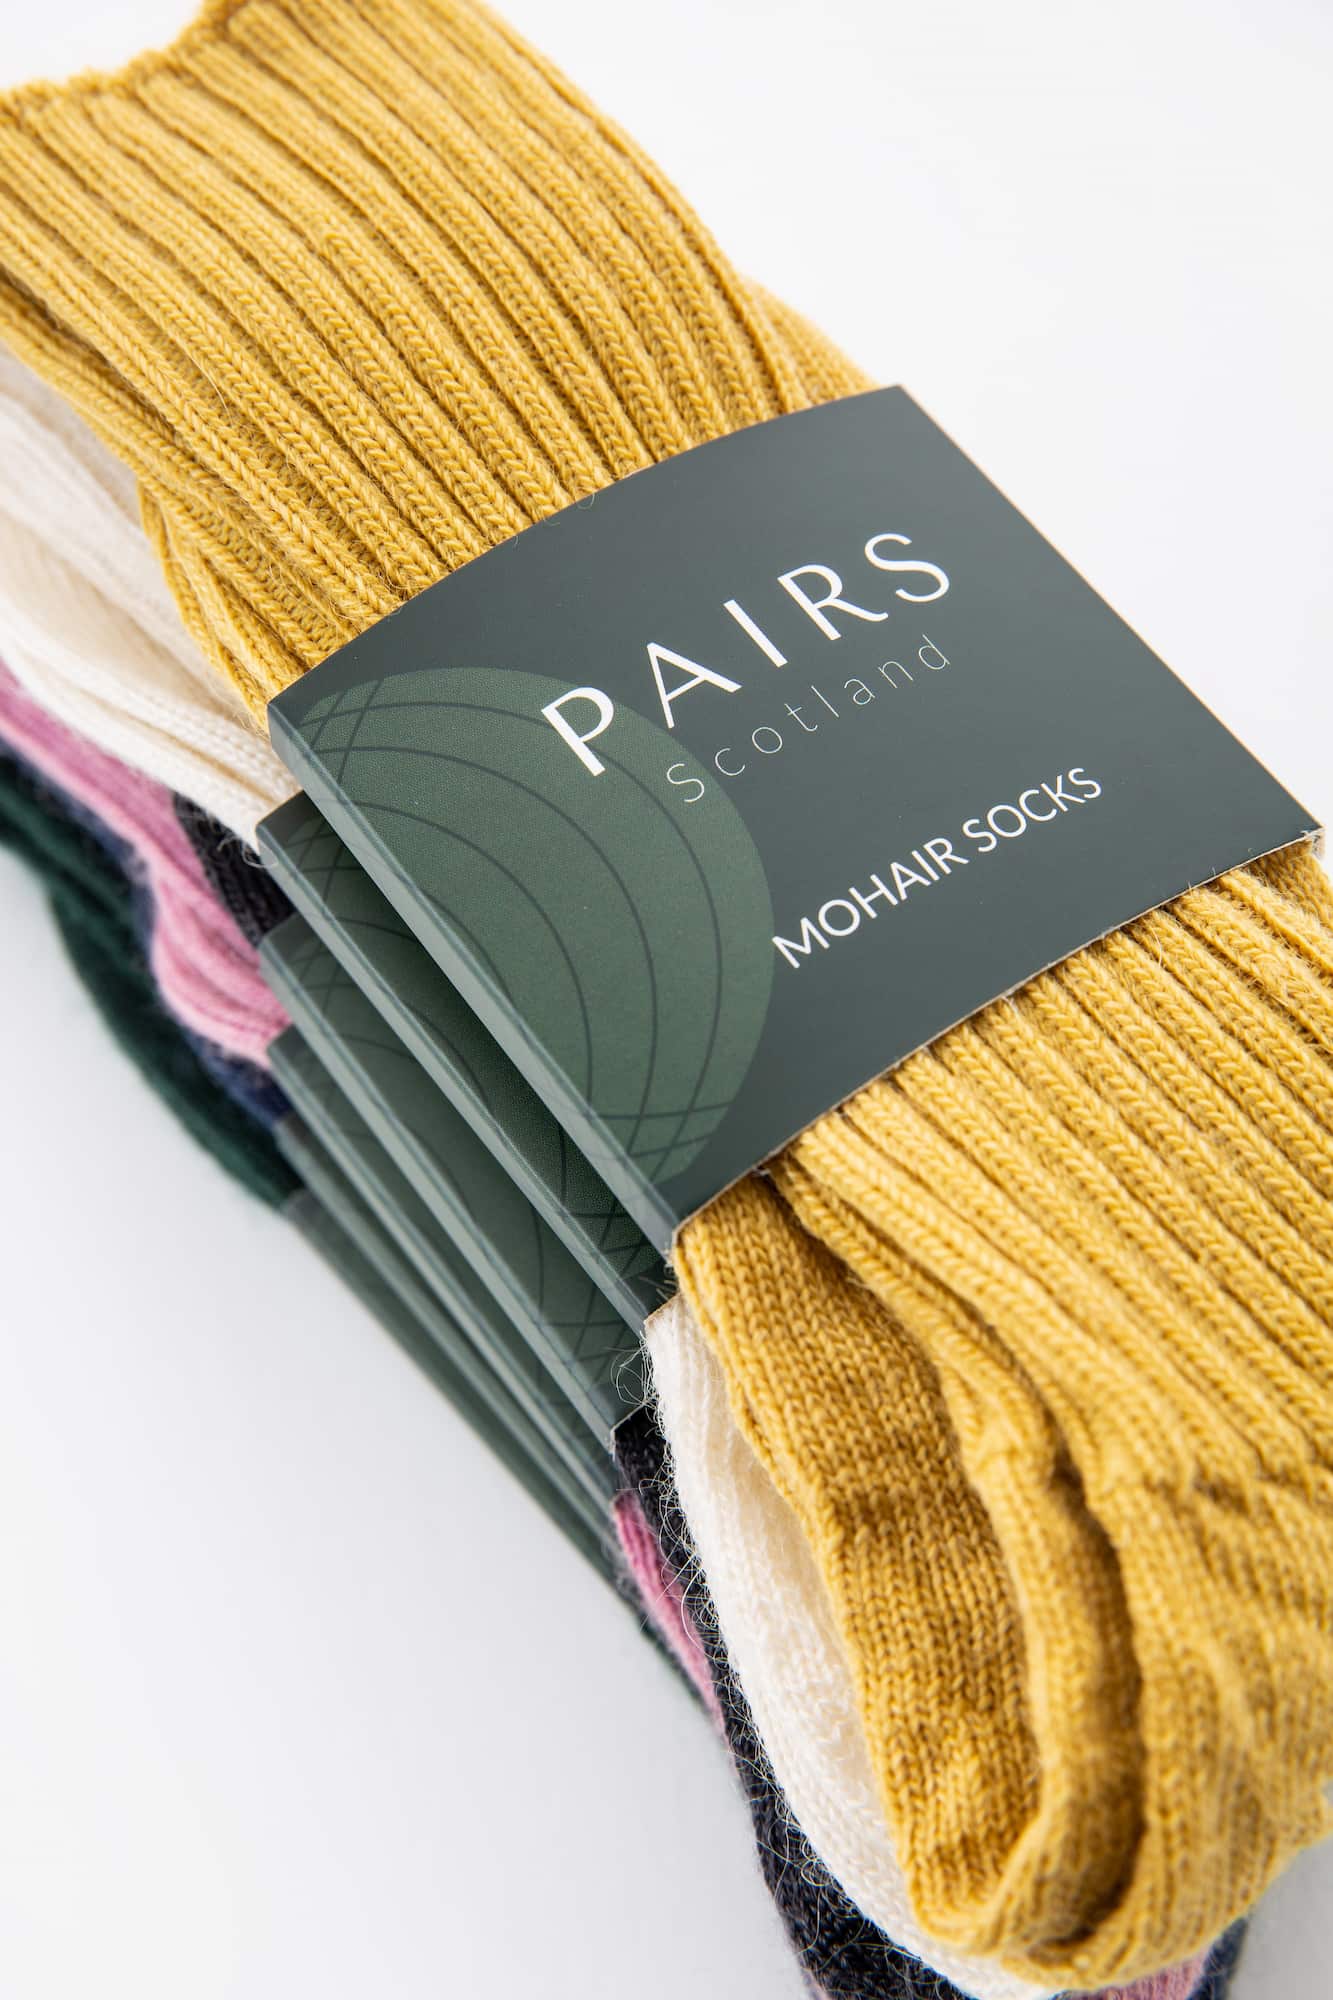 mohair everyday socks from pairs scotland